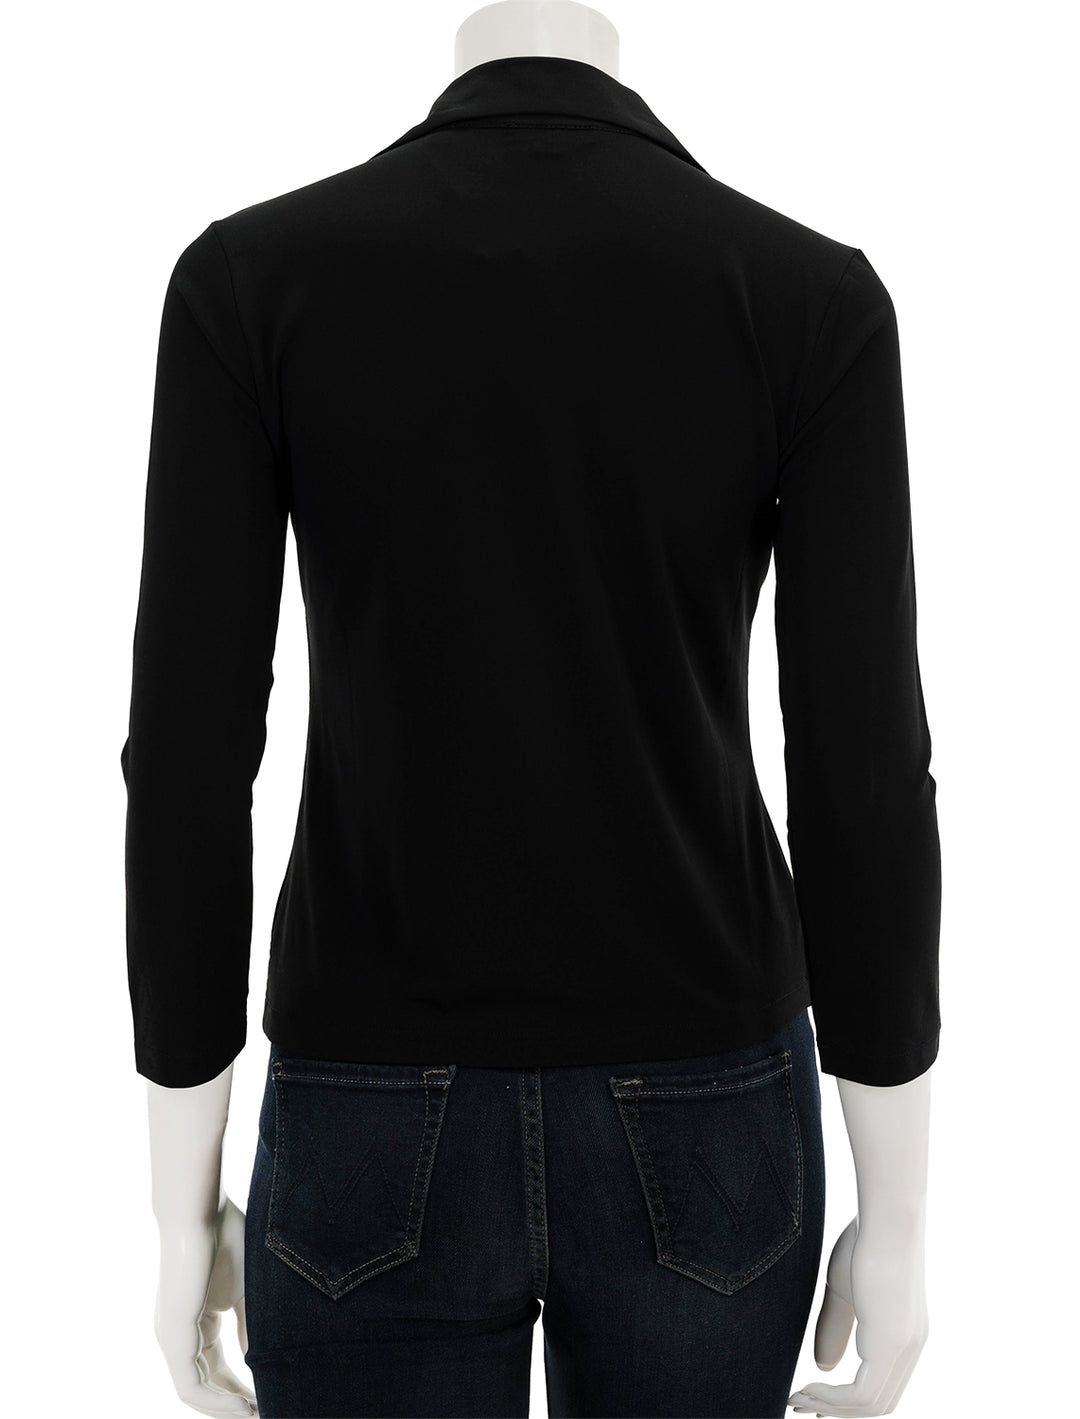 Back view of Vince's 3/4 sleeve button up shirt in black.